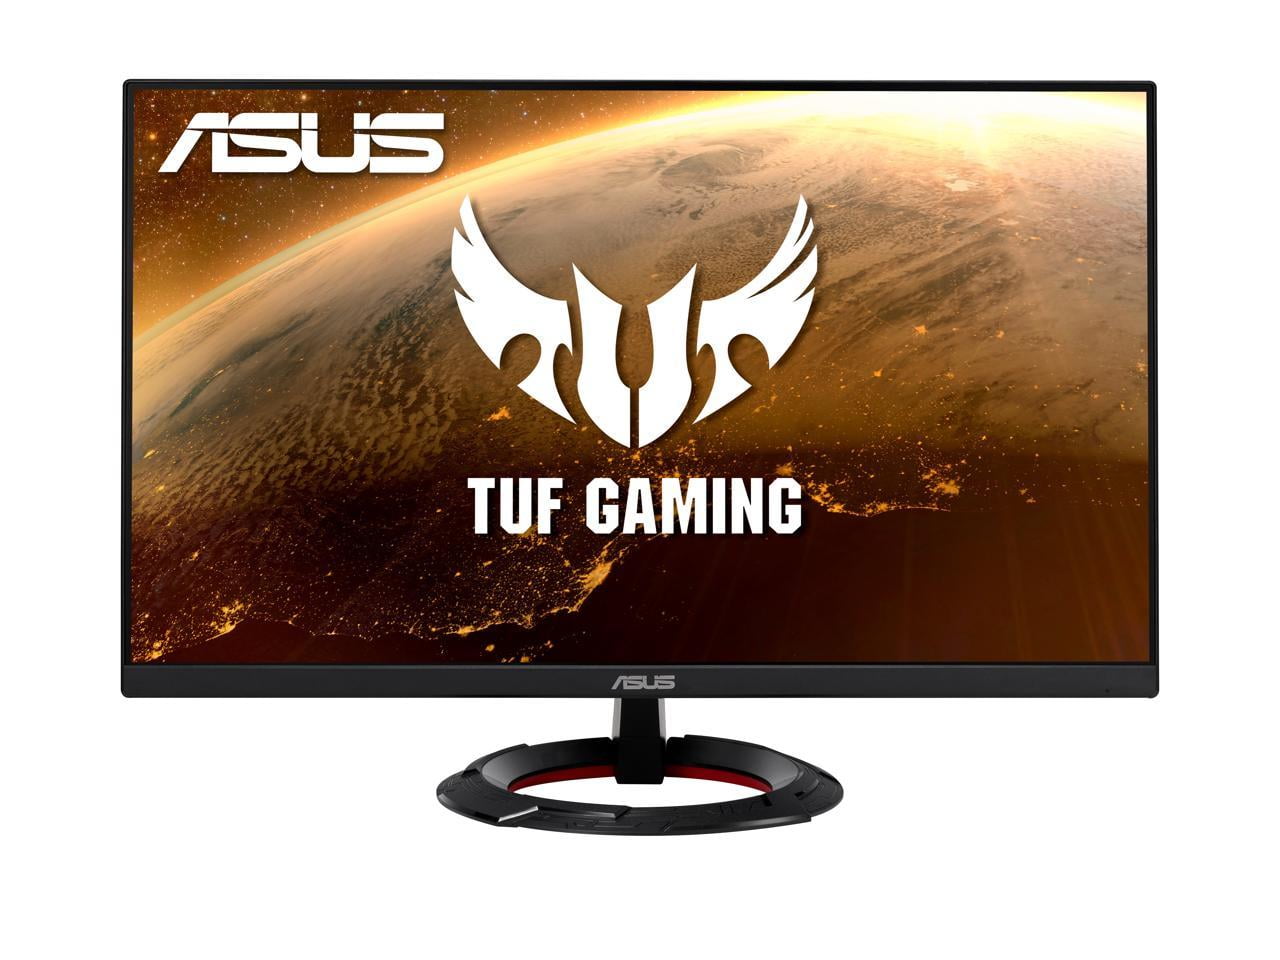  ASUS ROG Strix 17.3 1080P Portable Gaming Monitor  (XG17AHP)-FHD, IPS, 240Hz, Adaptive-Sync, Built-in Battery, ROG Bag, Tripod  Stand, USB Type-C, Micro HDMI for Laptop, PC, Console, 3-Year Warranty